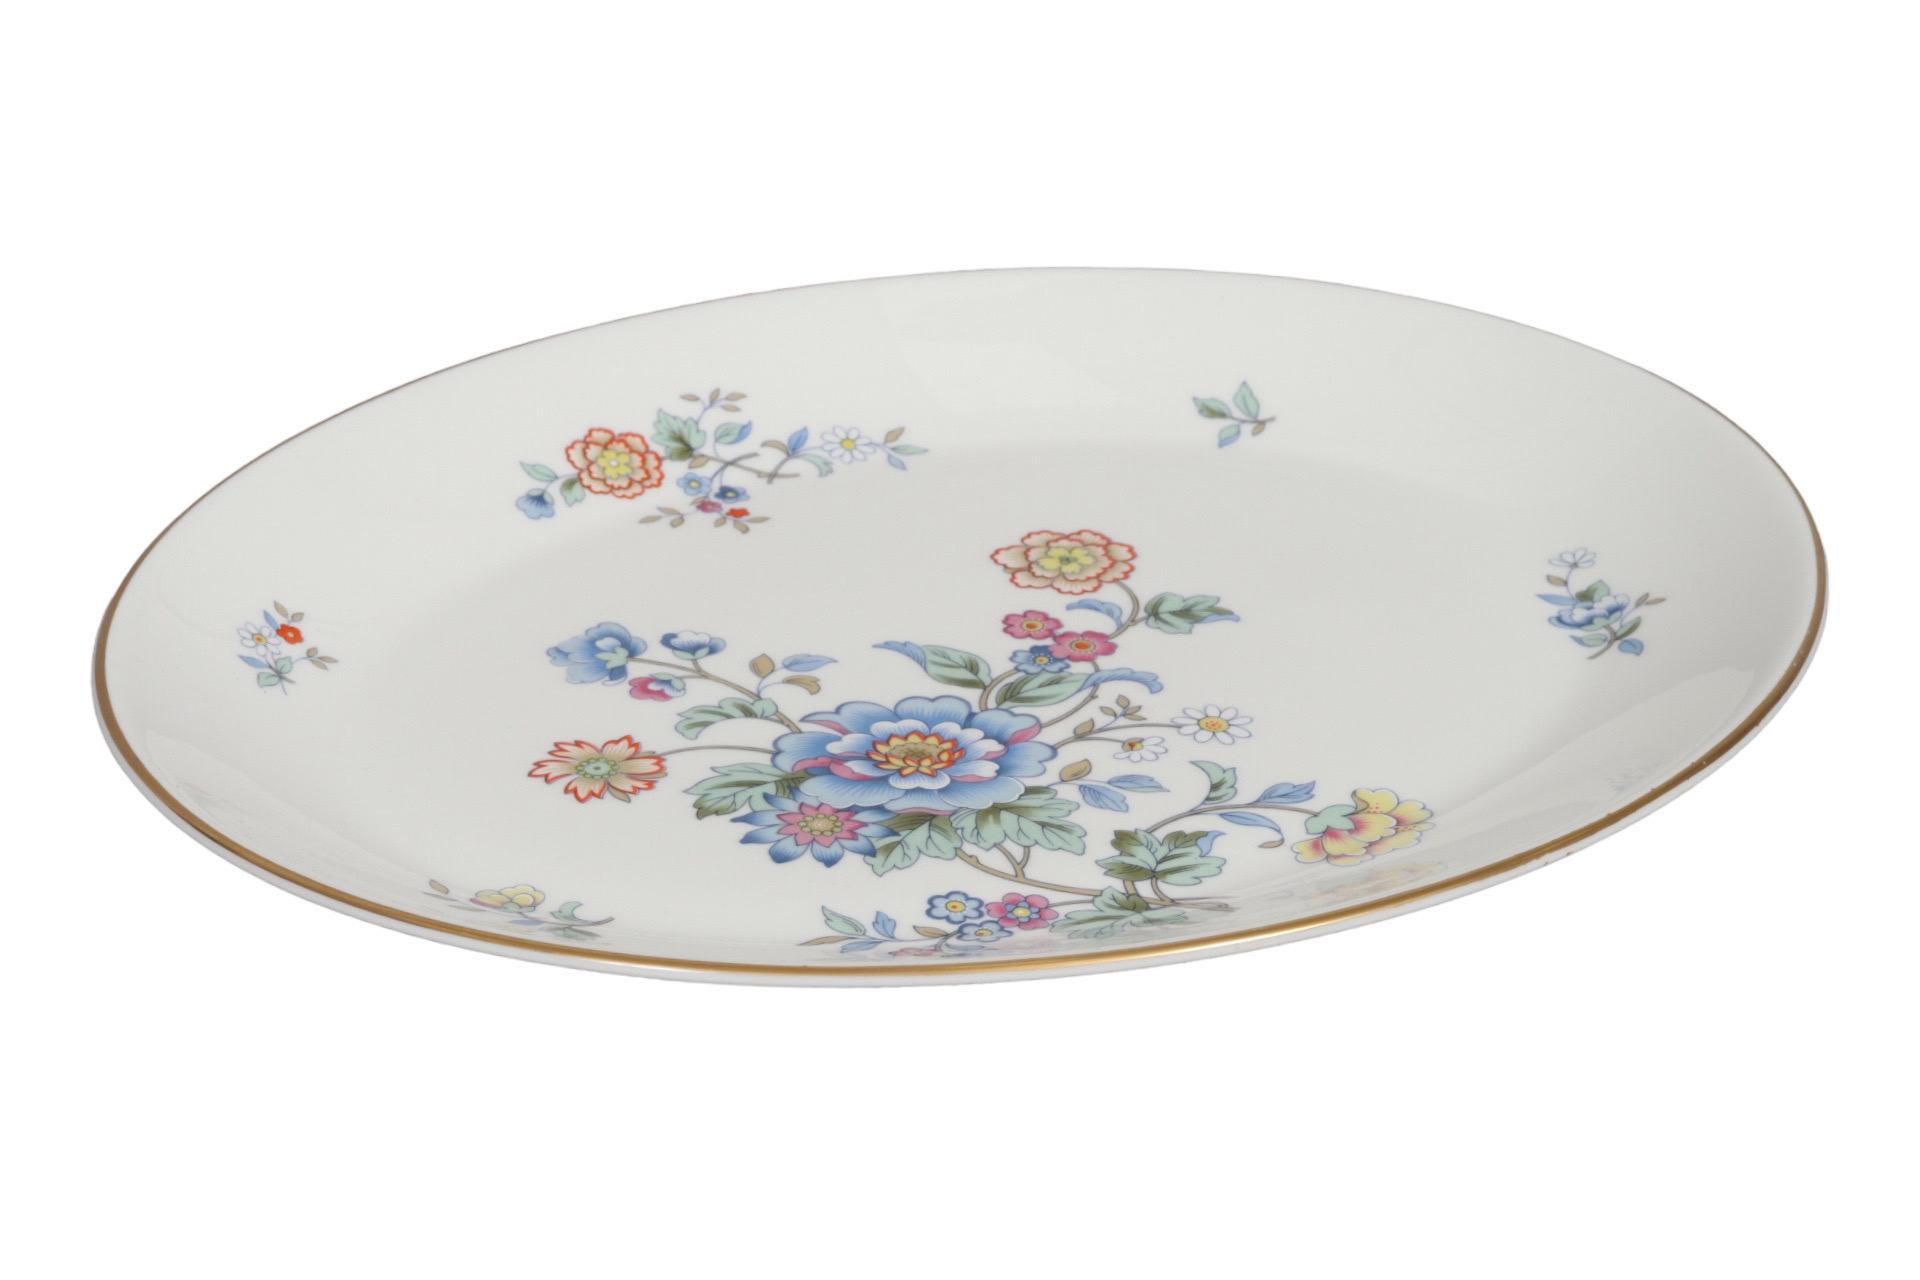 An English Bone China serving platter, produced by Royal Albert in the 1980's in their Hidden Valley, New Romance pattern. An off-center bouquet of stylized flowers is mirrored in floral sprays around the gilt-edged lip. Maker's mark underneath.